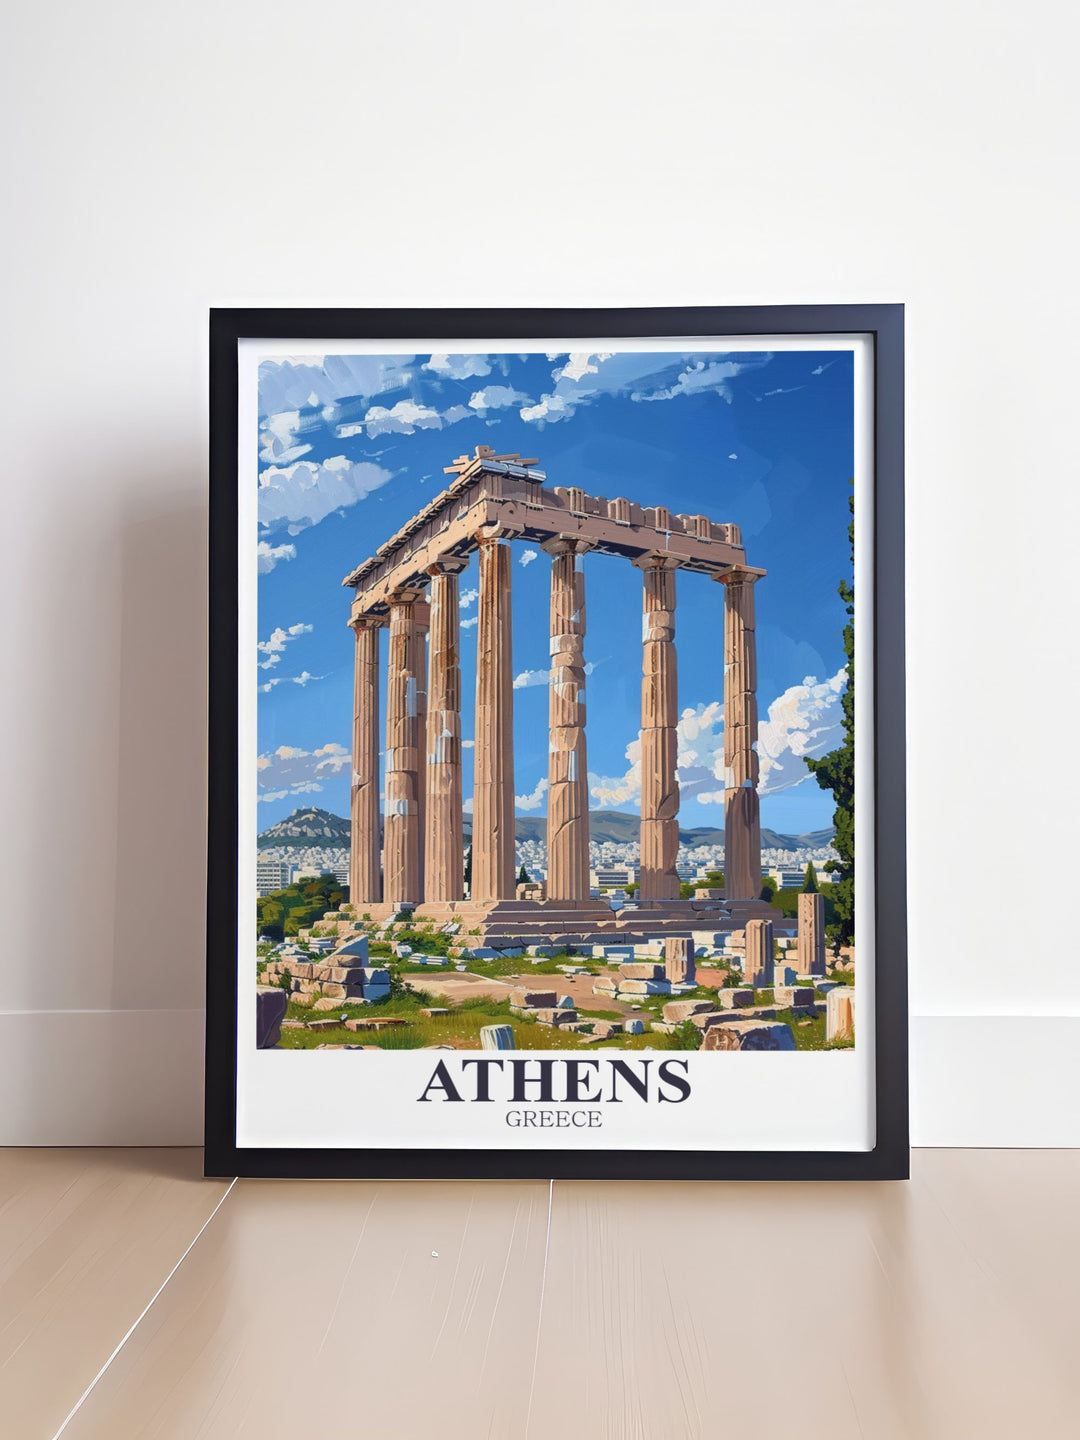 Templeof Olympian Zeus Prints showcasing the grandeur and majesty of ancient Greece perfect for home decor and gifts capturing the essence of Athens in stunning detail